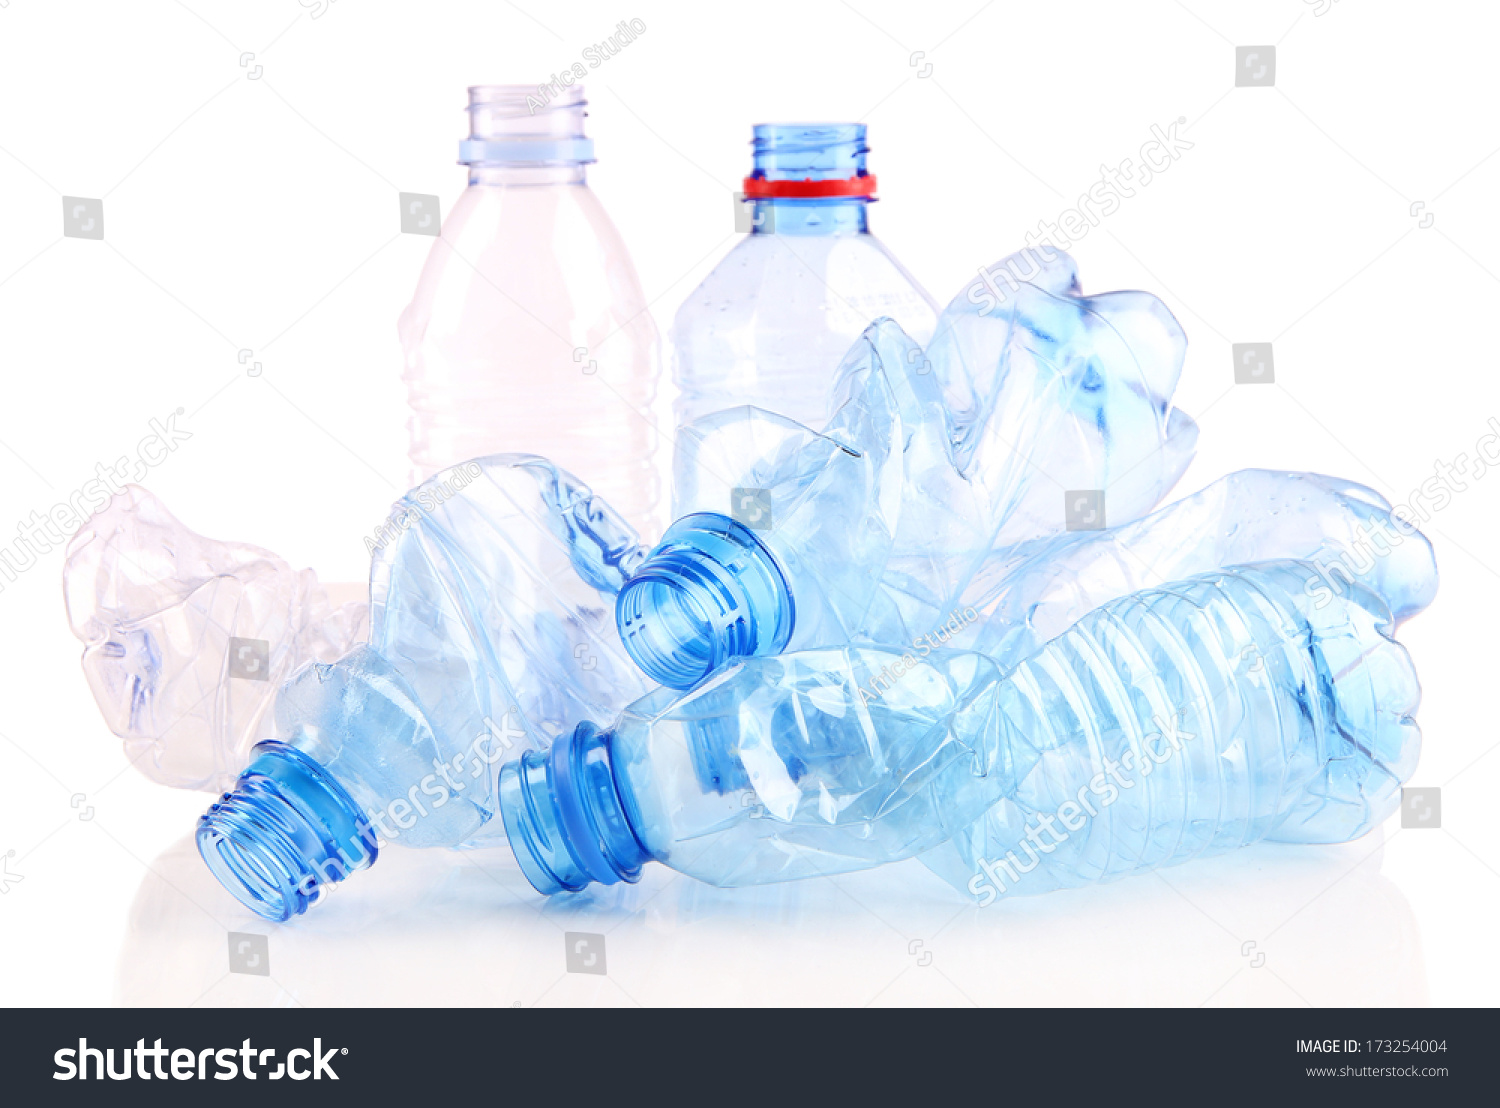 powerpoint-template-plastic-recycling-bottle-isolated-on-iokjmlhhl